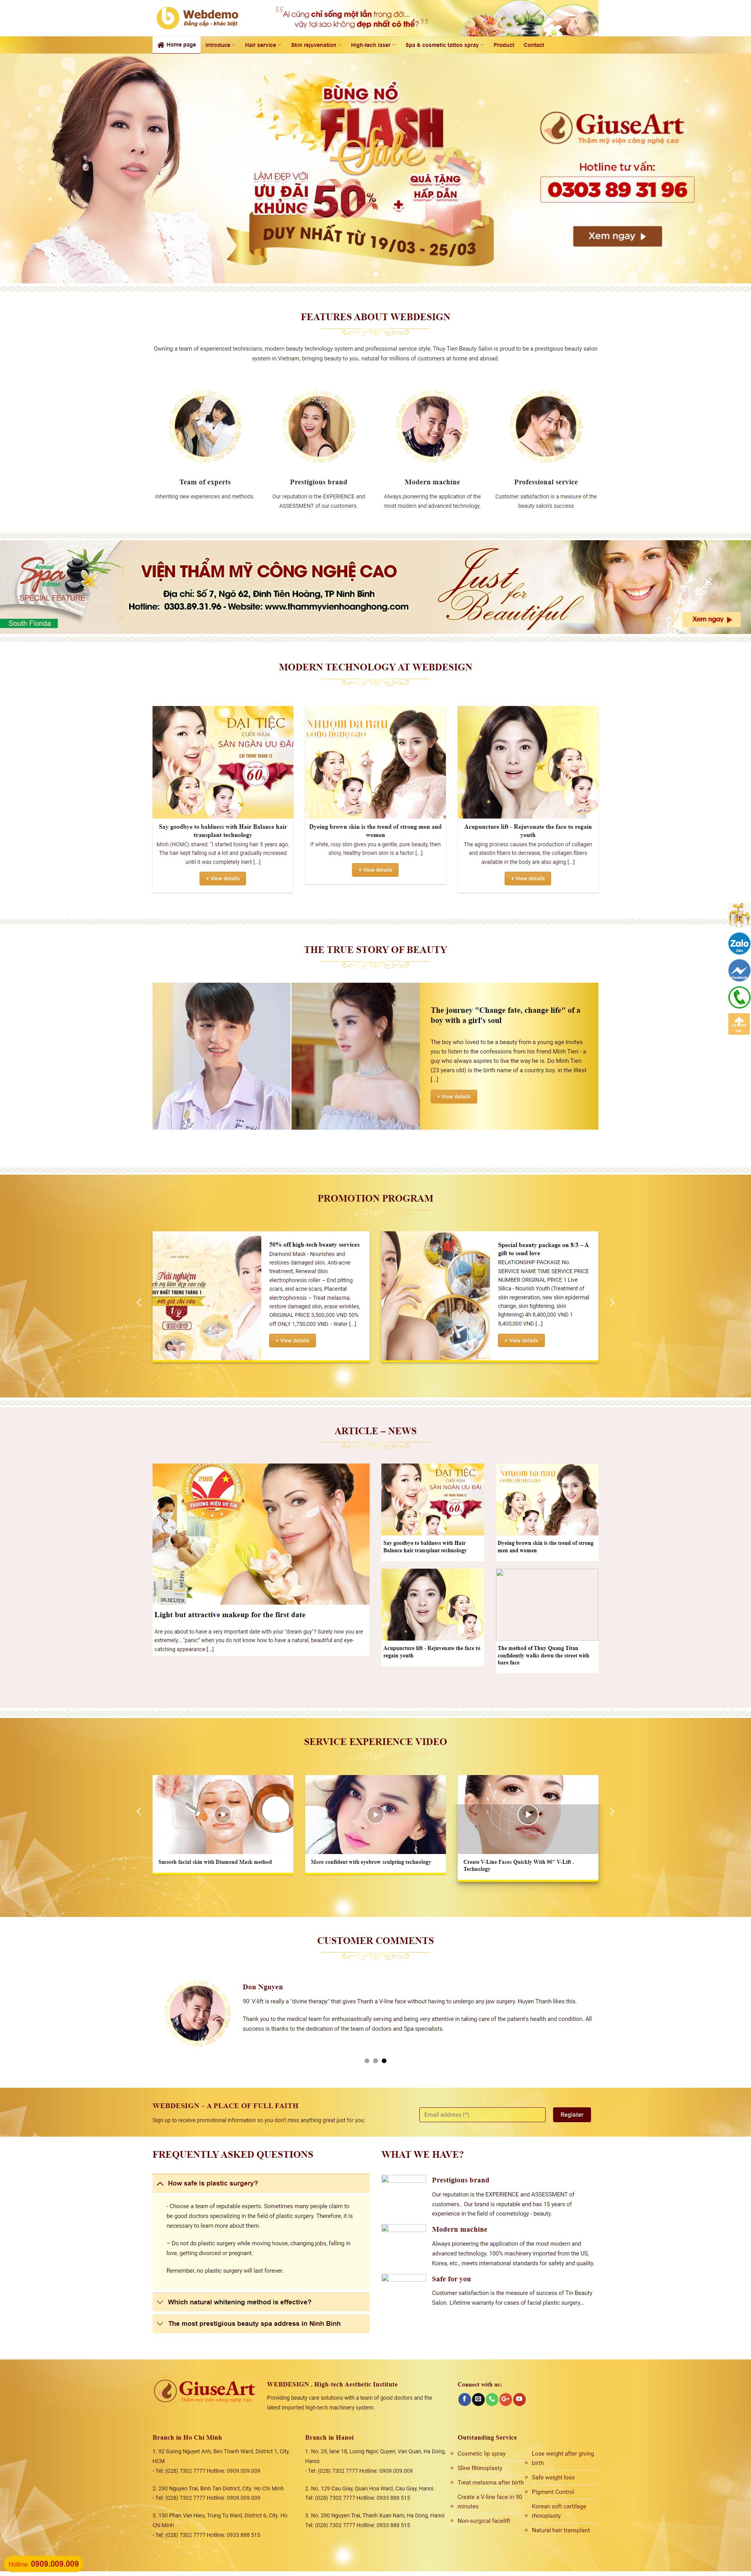 Website template to introduce beauty salon full content